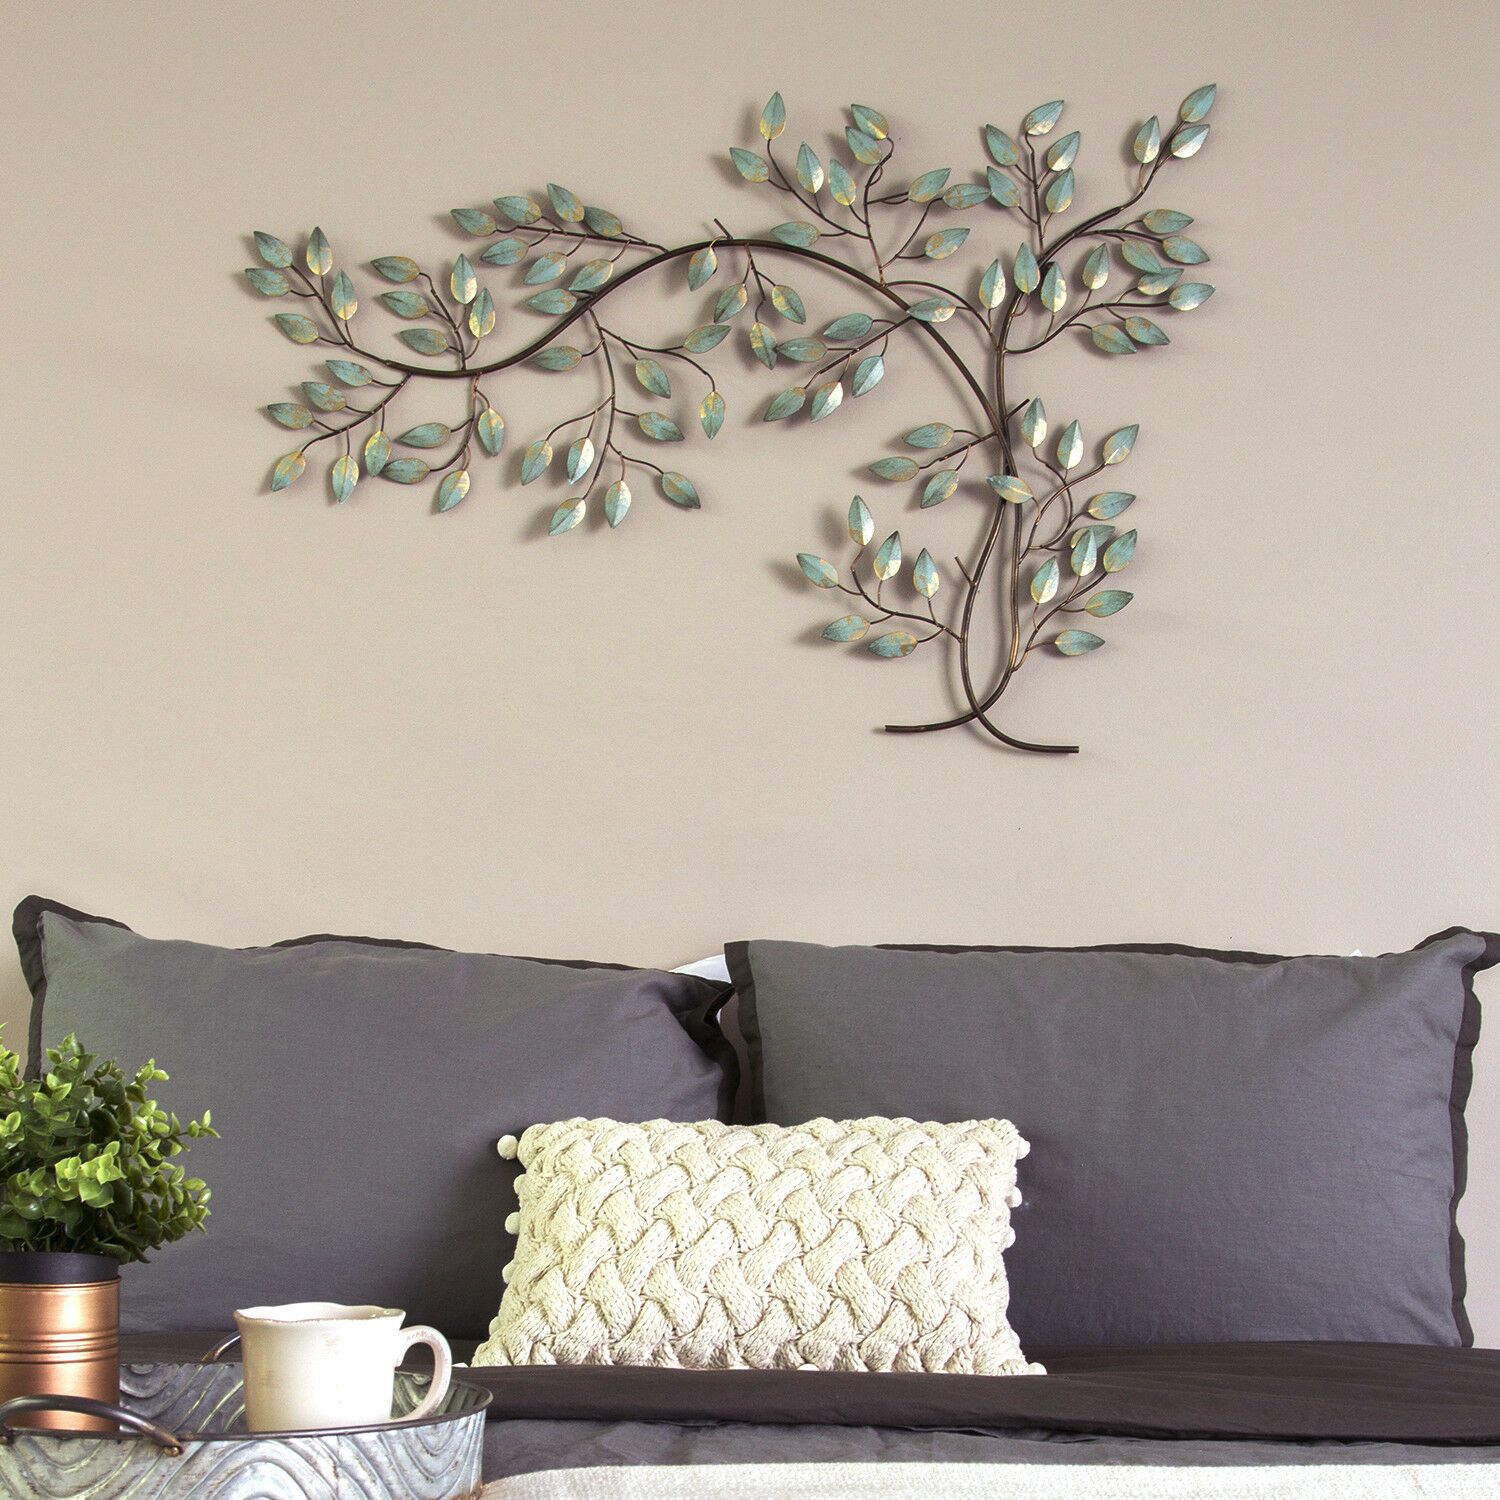 Large Metal Tree Branch Hanging Interior Wall Art Home Decor | Ebay Pertaining To 2017 Polished Metal Wall Art (View 7 of 20)